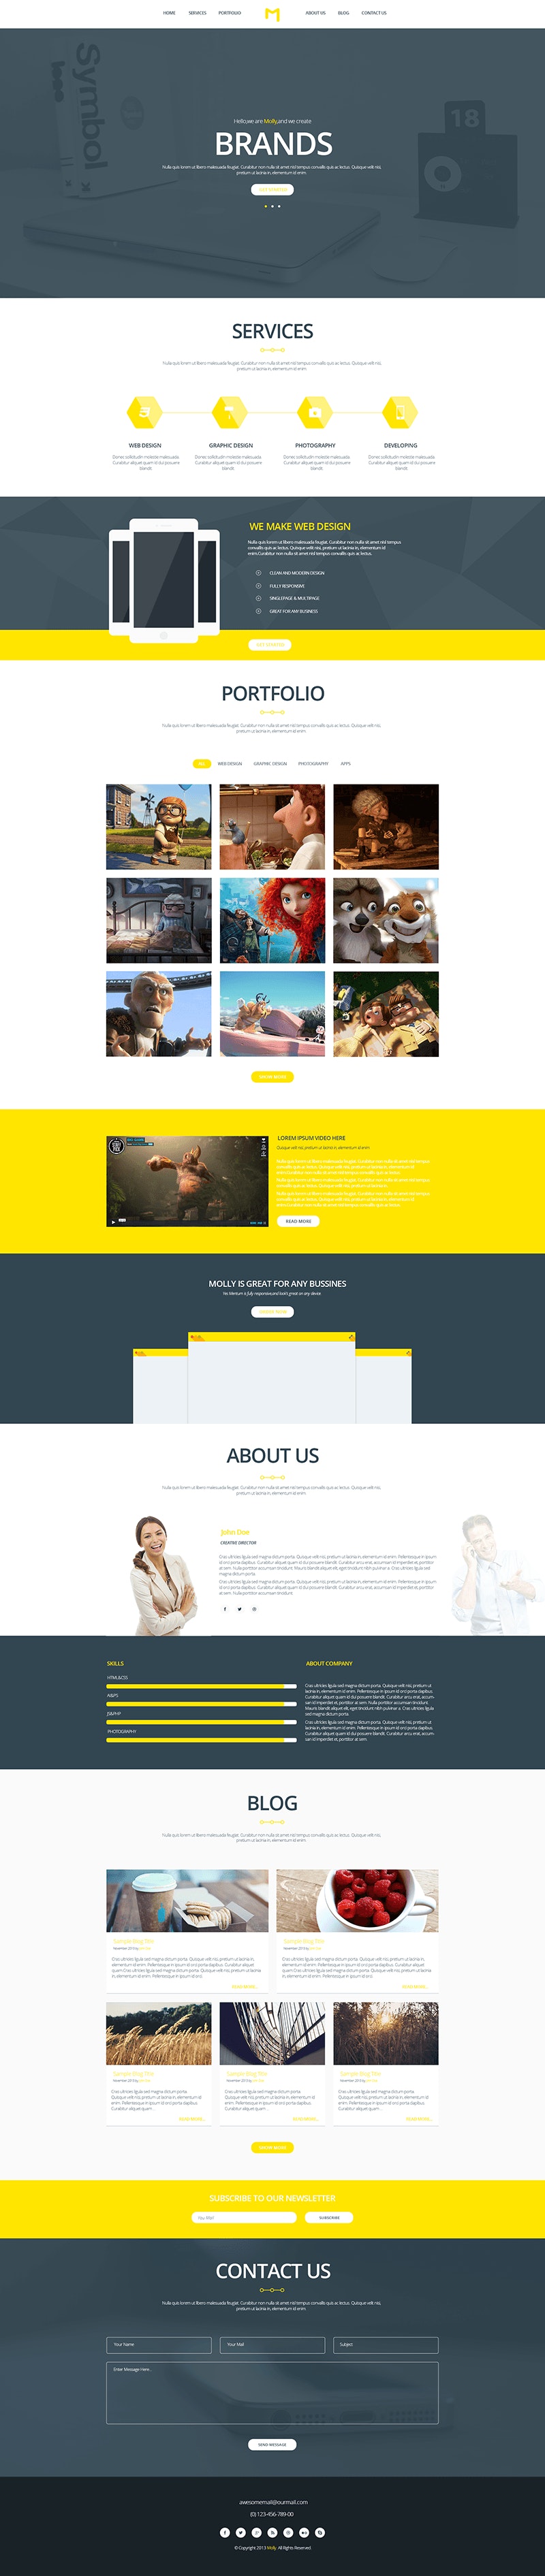 Molly - Free Bootstrap Single Page Portfolio Template preview